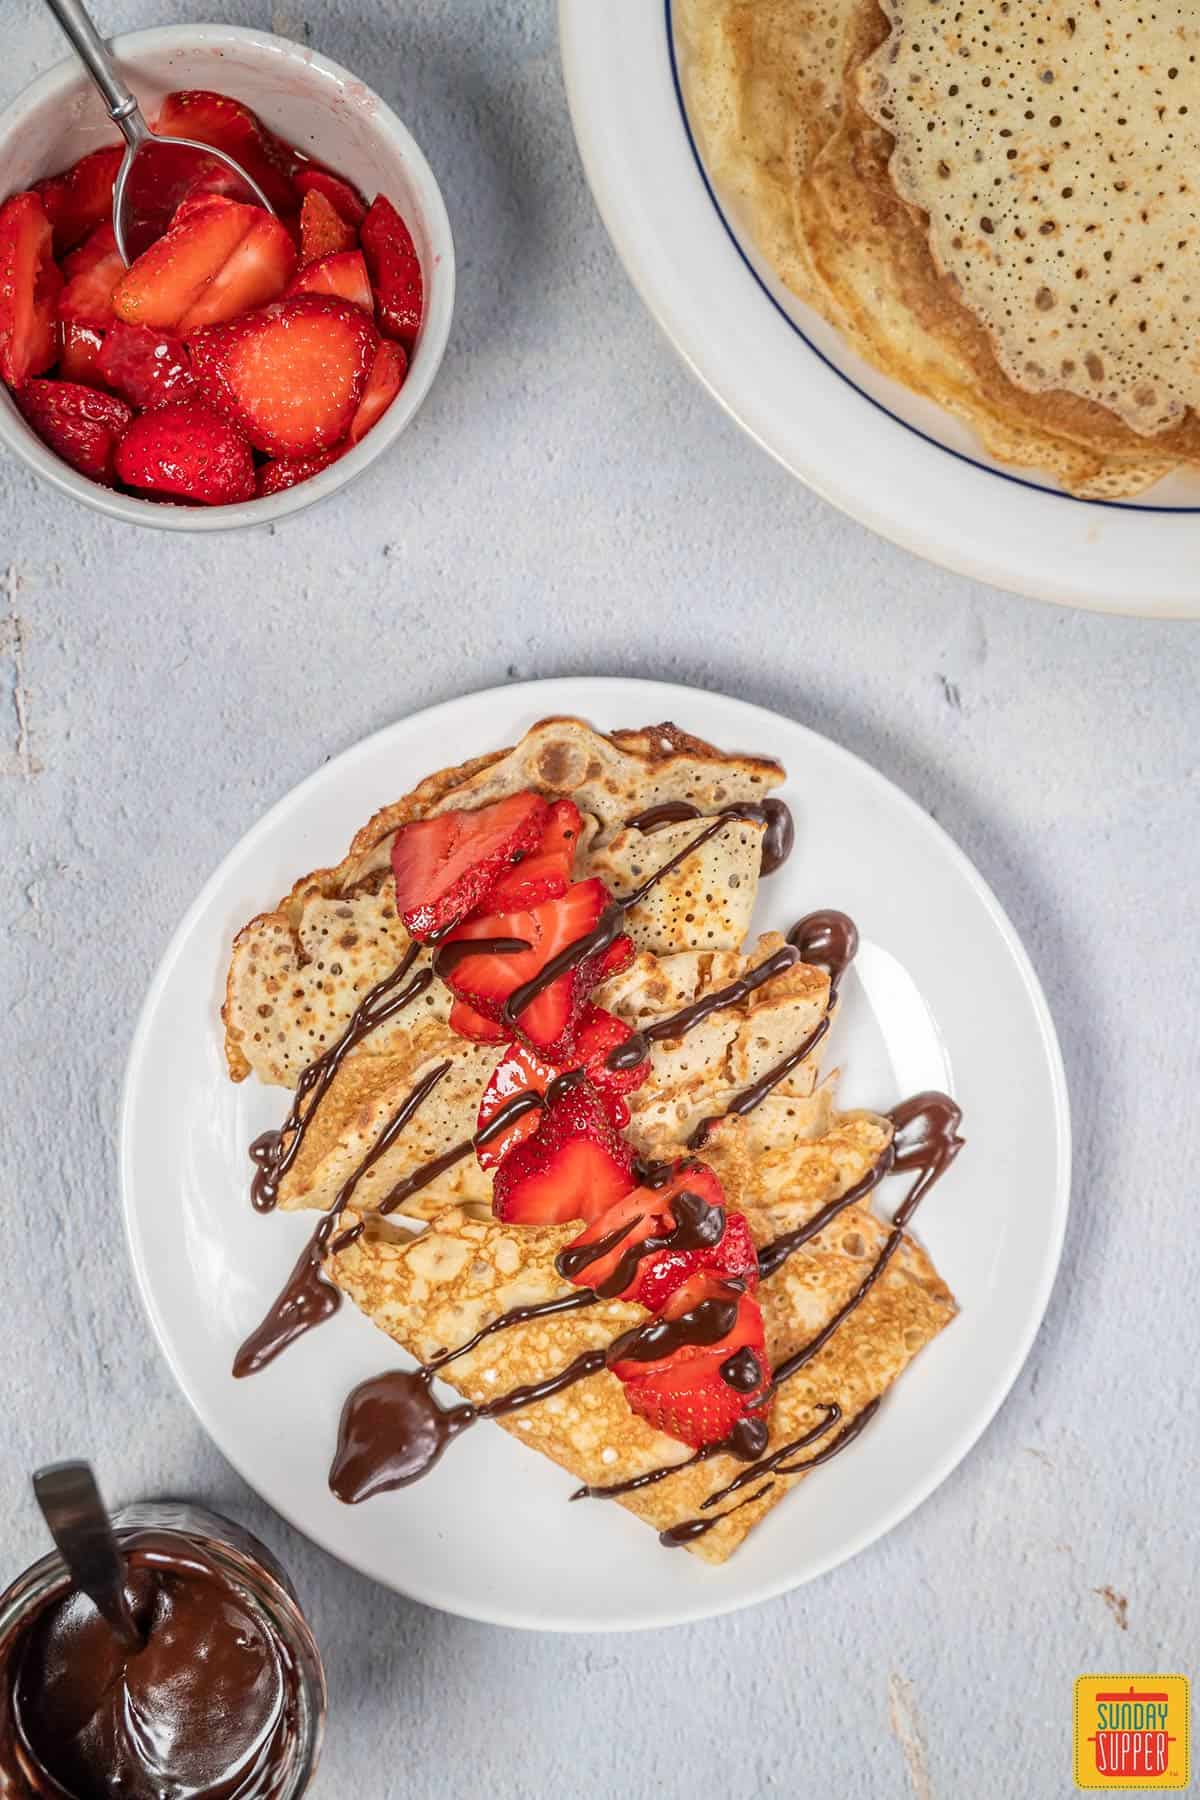 Strawberry crepes on a white plate drizzled with chocolate syrup